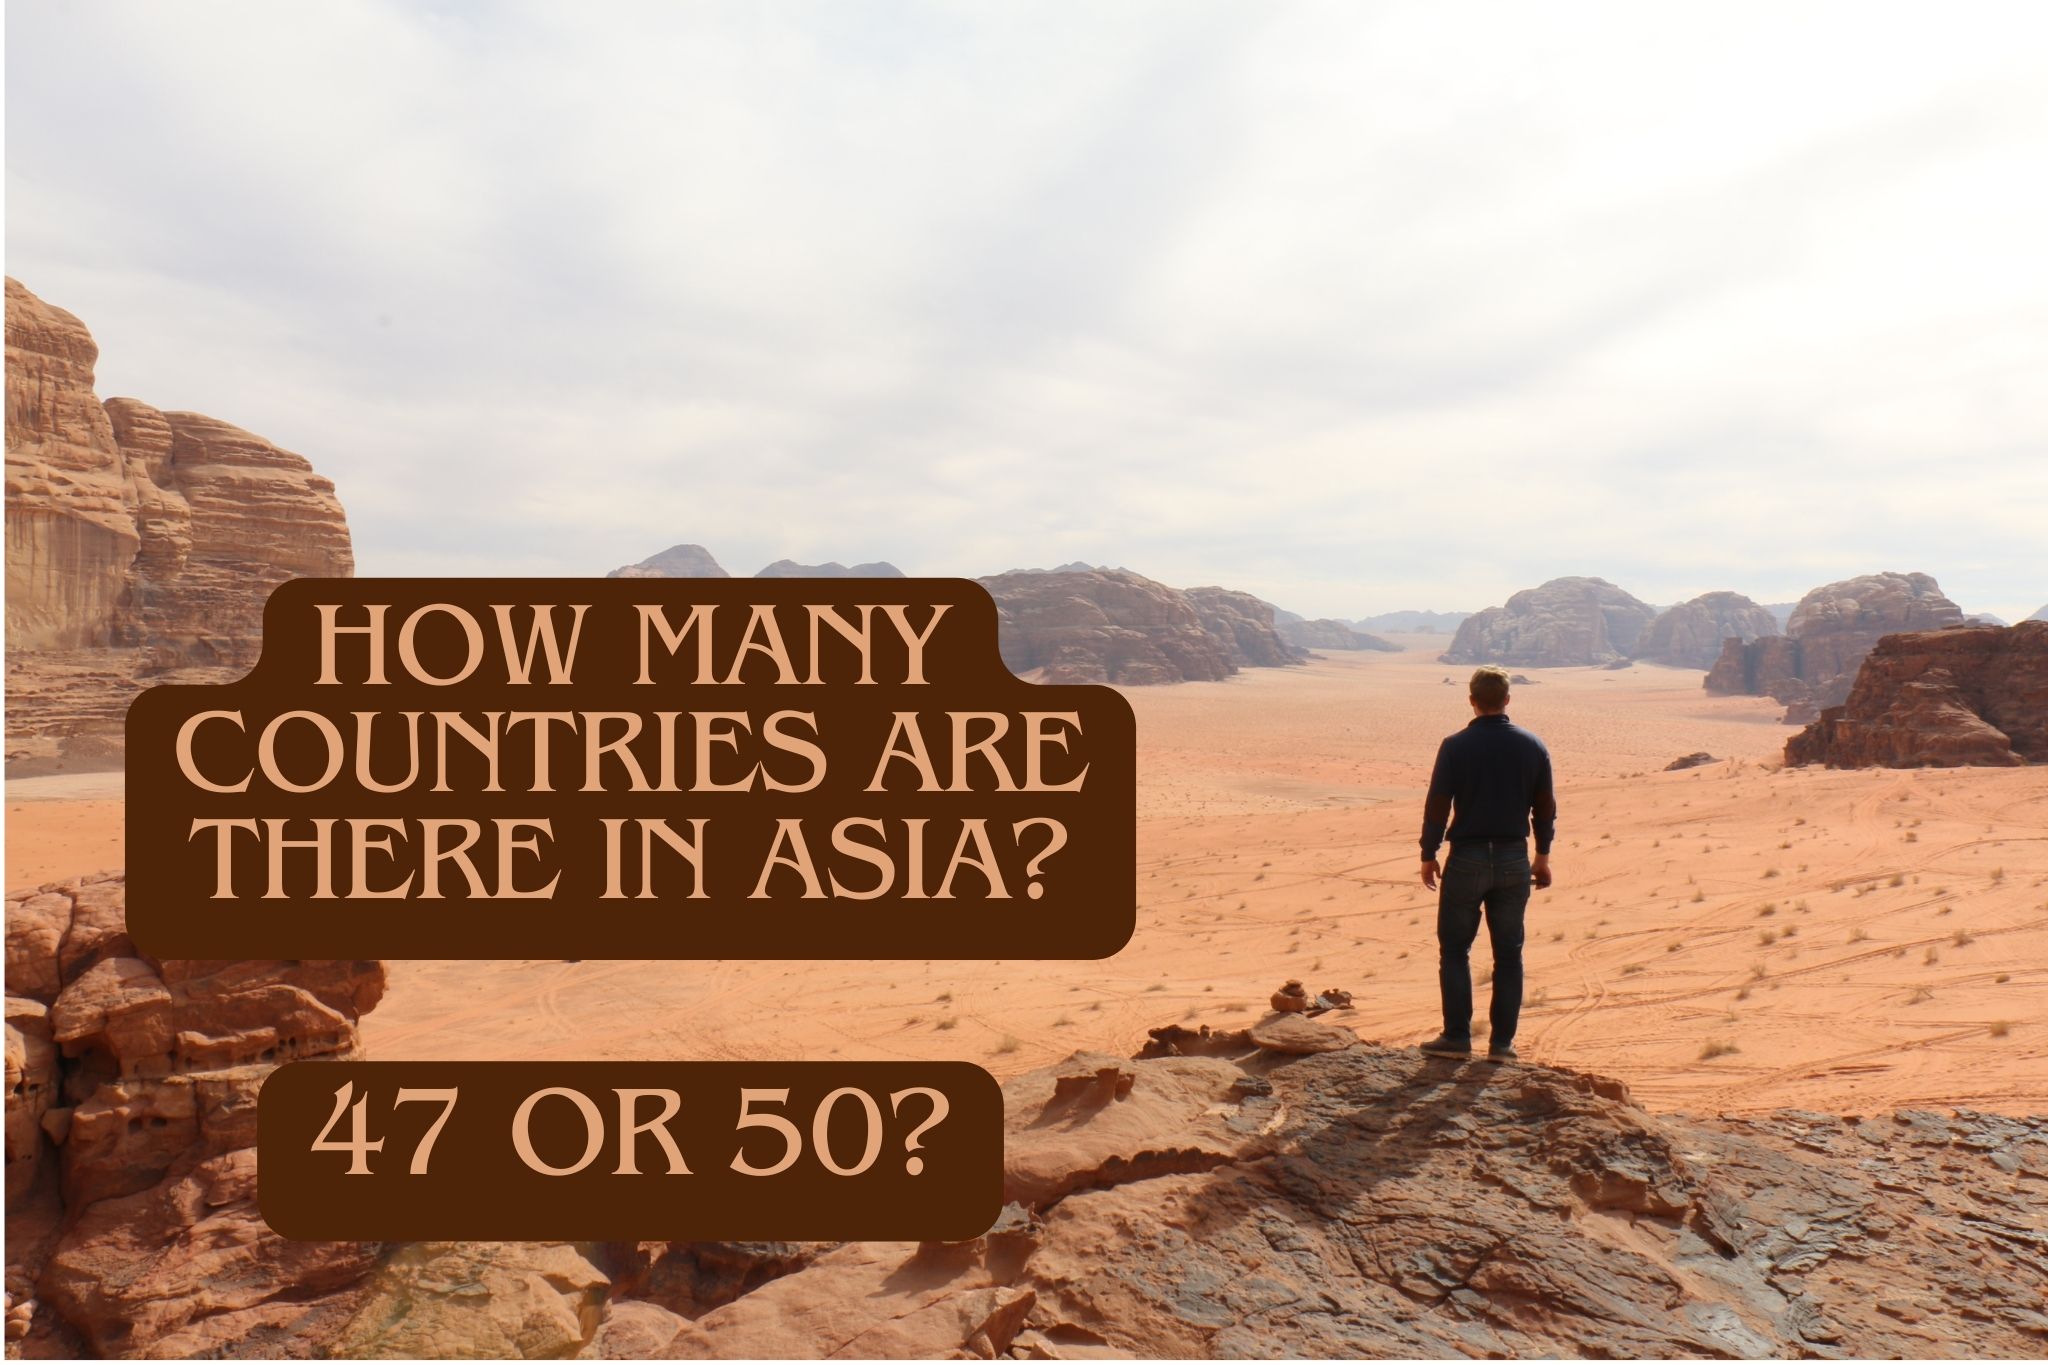 How many countries are there in Asia